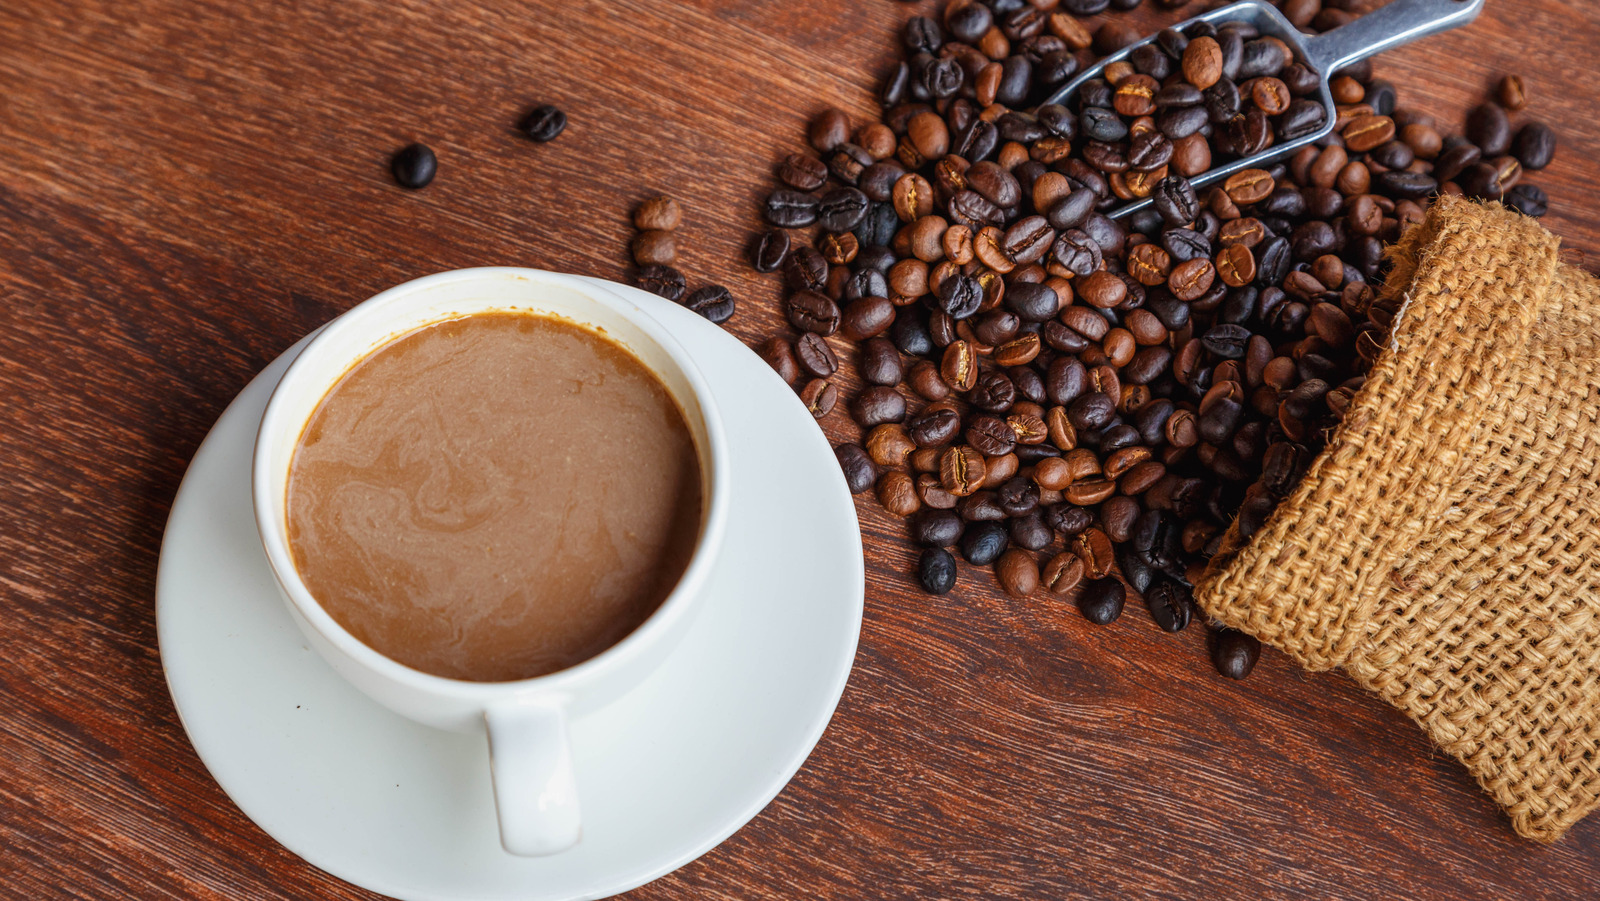 New Study Reveals Your Morning Coffee May Lead To A Longer Life